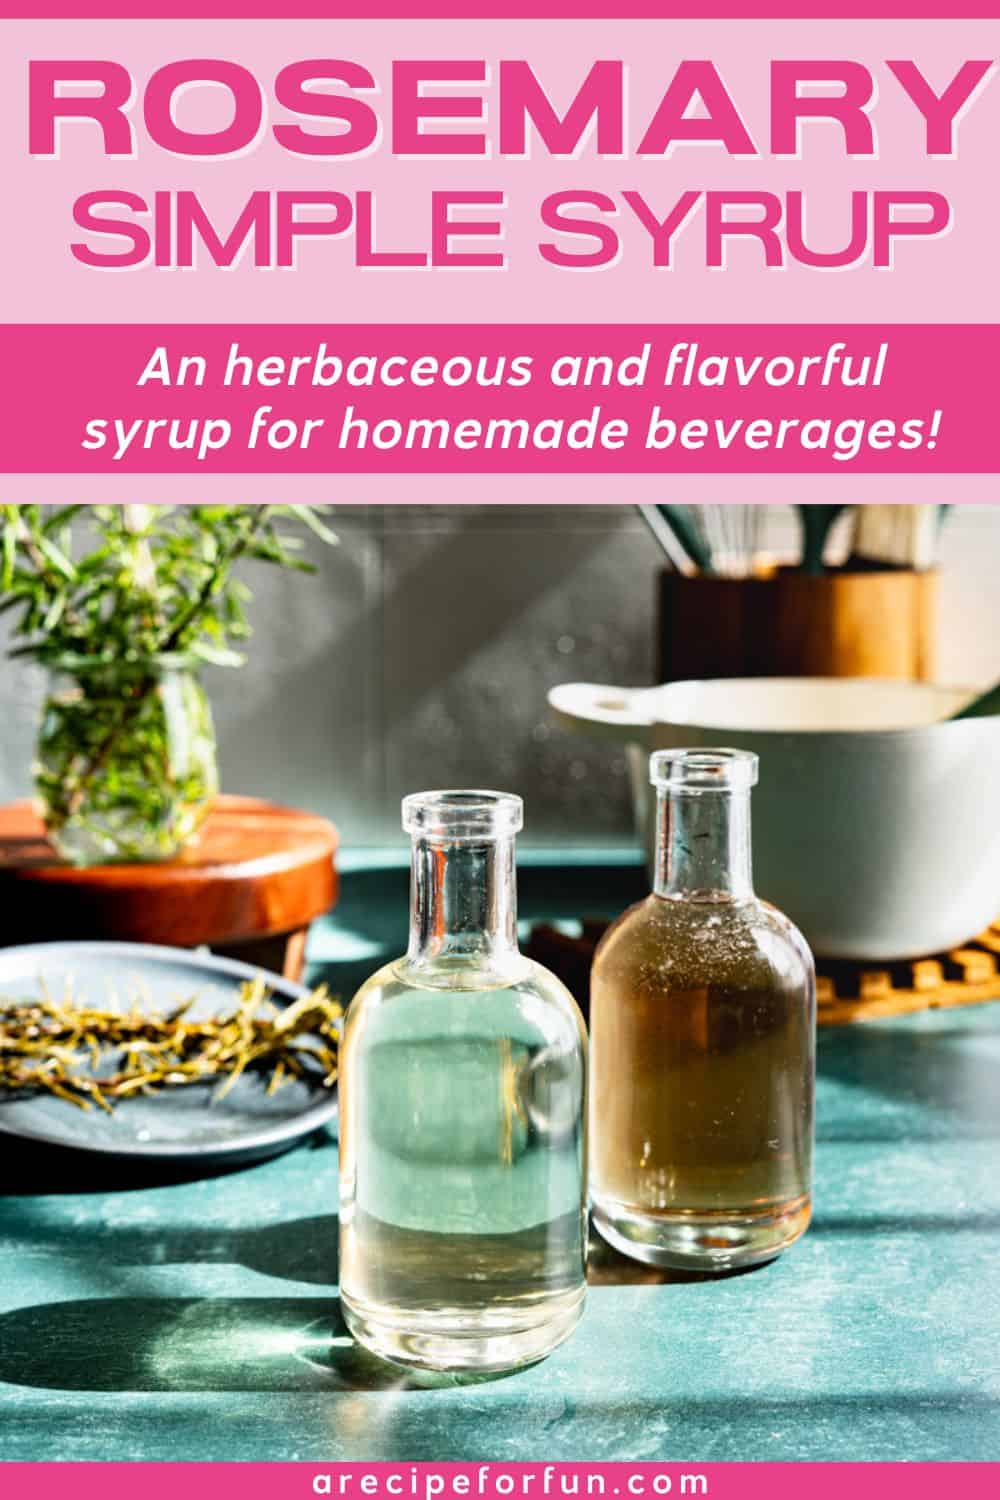 Pinterest Pin for a post about a recipe for a rosemary simple syrup recipe.